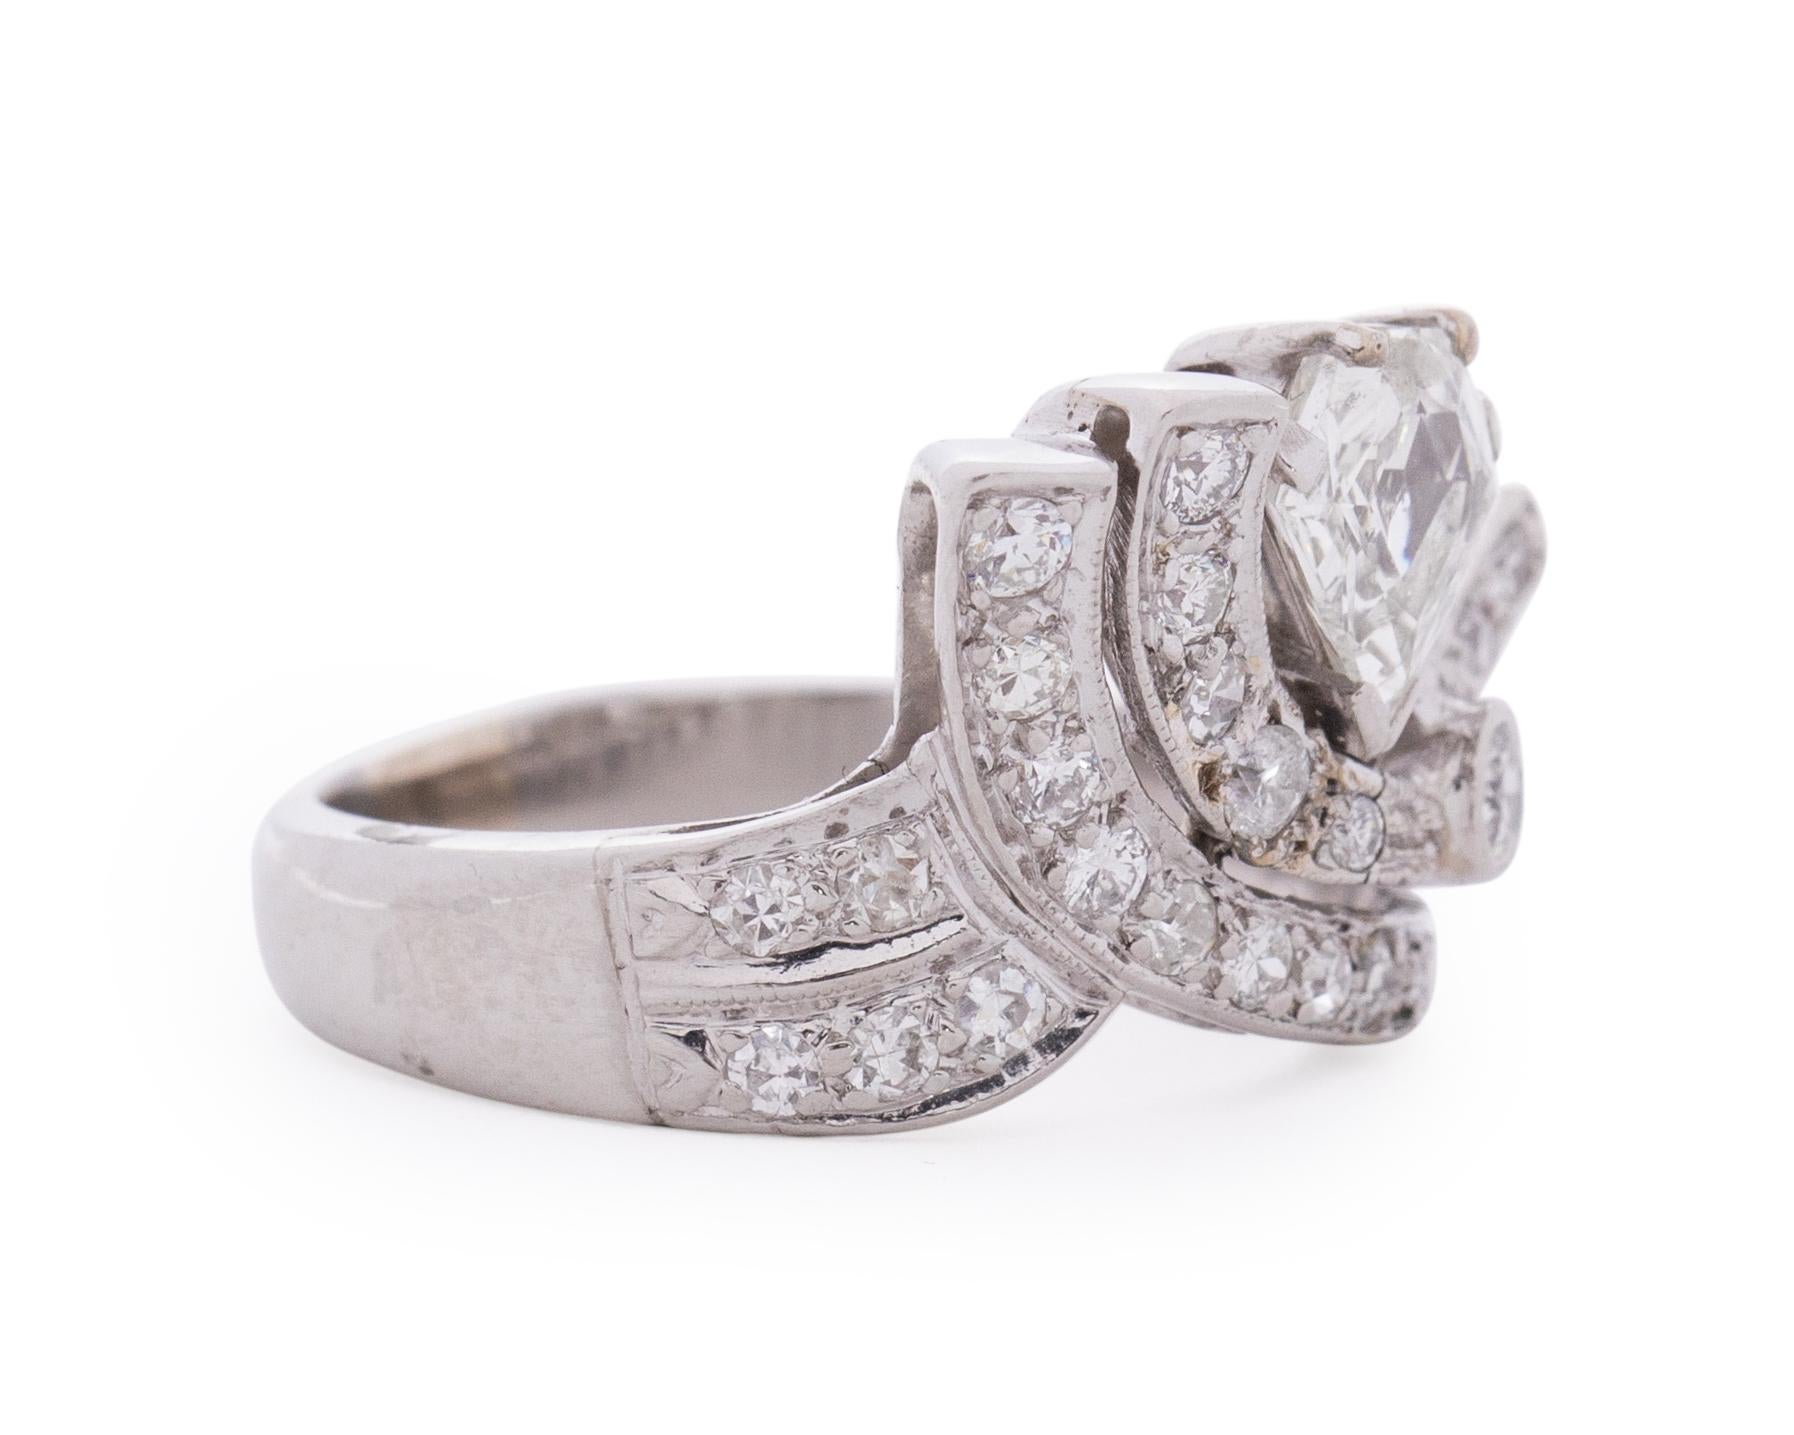 Item Details: 
Ring Size: 6.5
Metal Type: Platinum [Hallmarked, and Tested]
Weight: 7.9 grams

Center Diamond Details:
Weight: .90 Carat
Cut: Antique Shield Cut
Color: I
Clarity: SI2

Side Stones: Natural Diamonds, Old European Cut, .20cttw, G-H